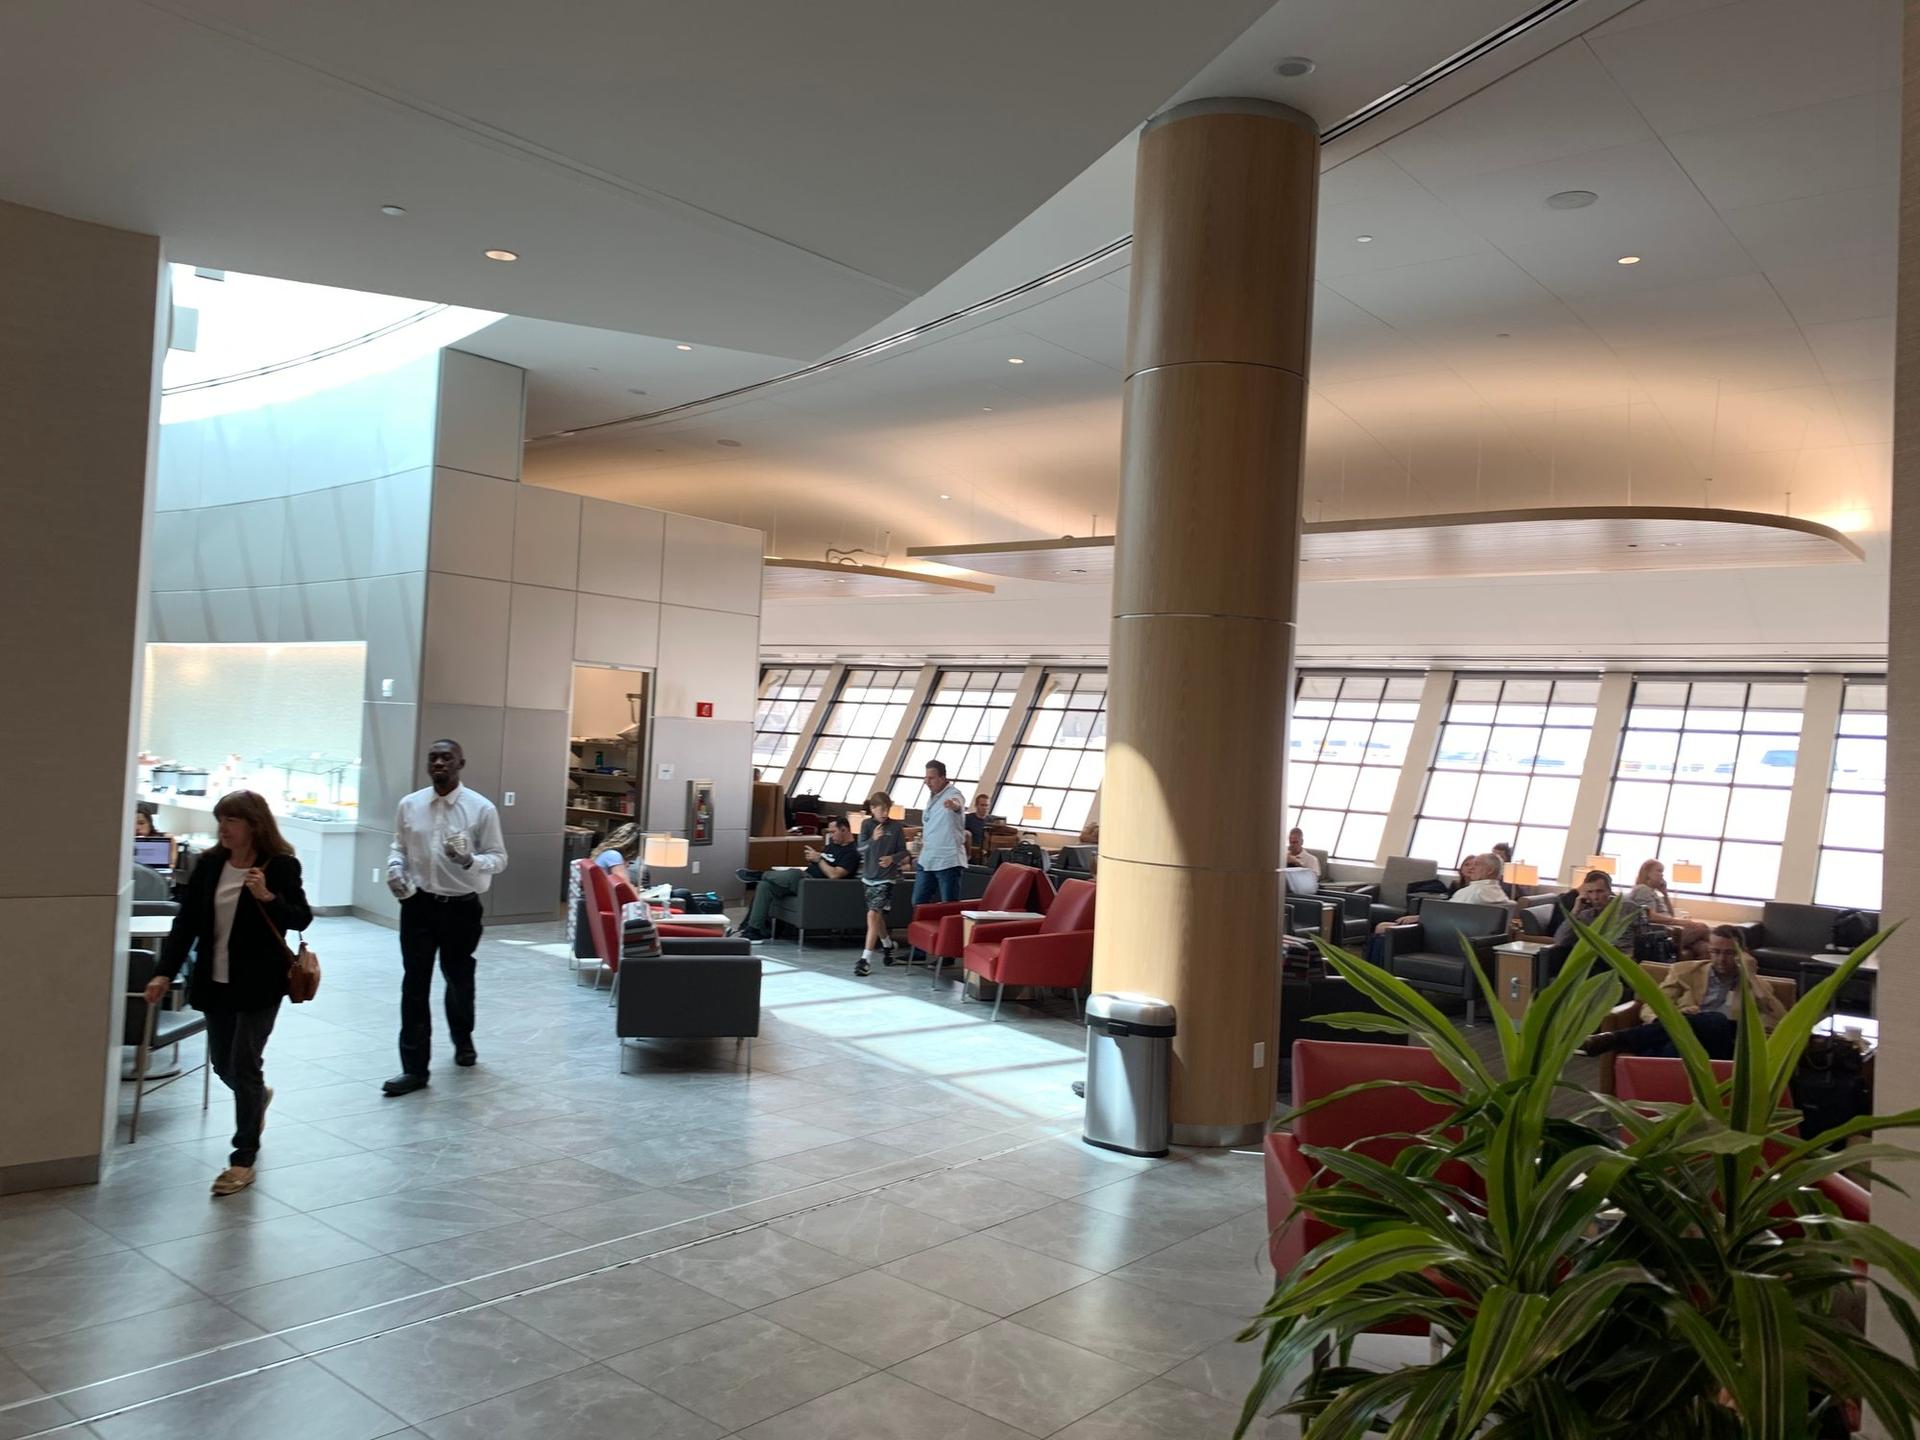 American Airlines Admirals Club image 2 of 2